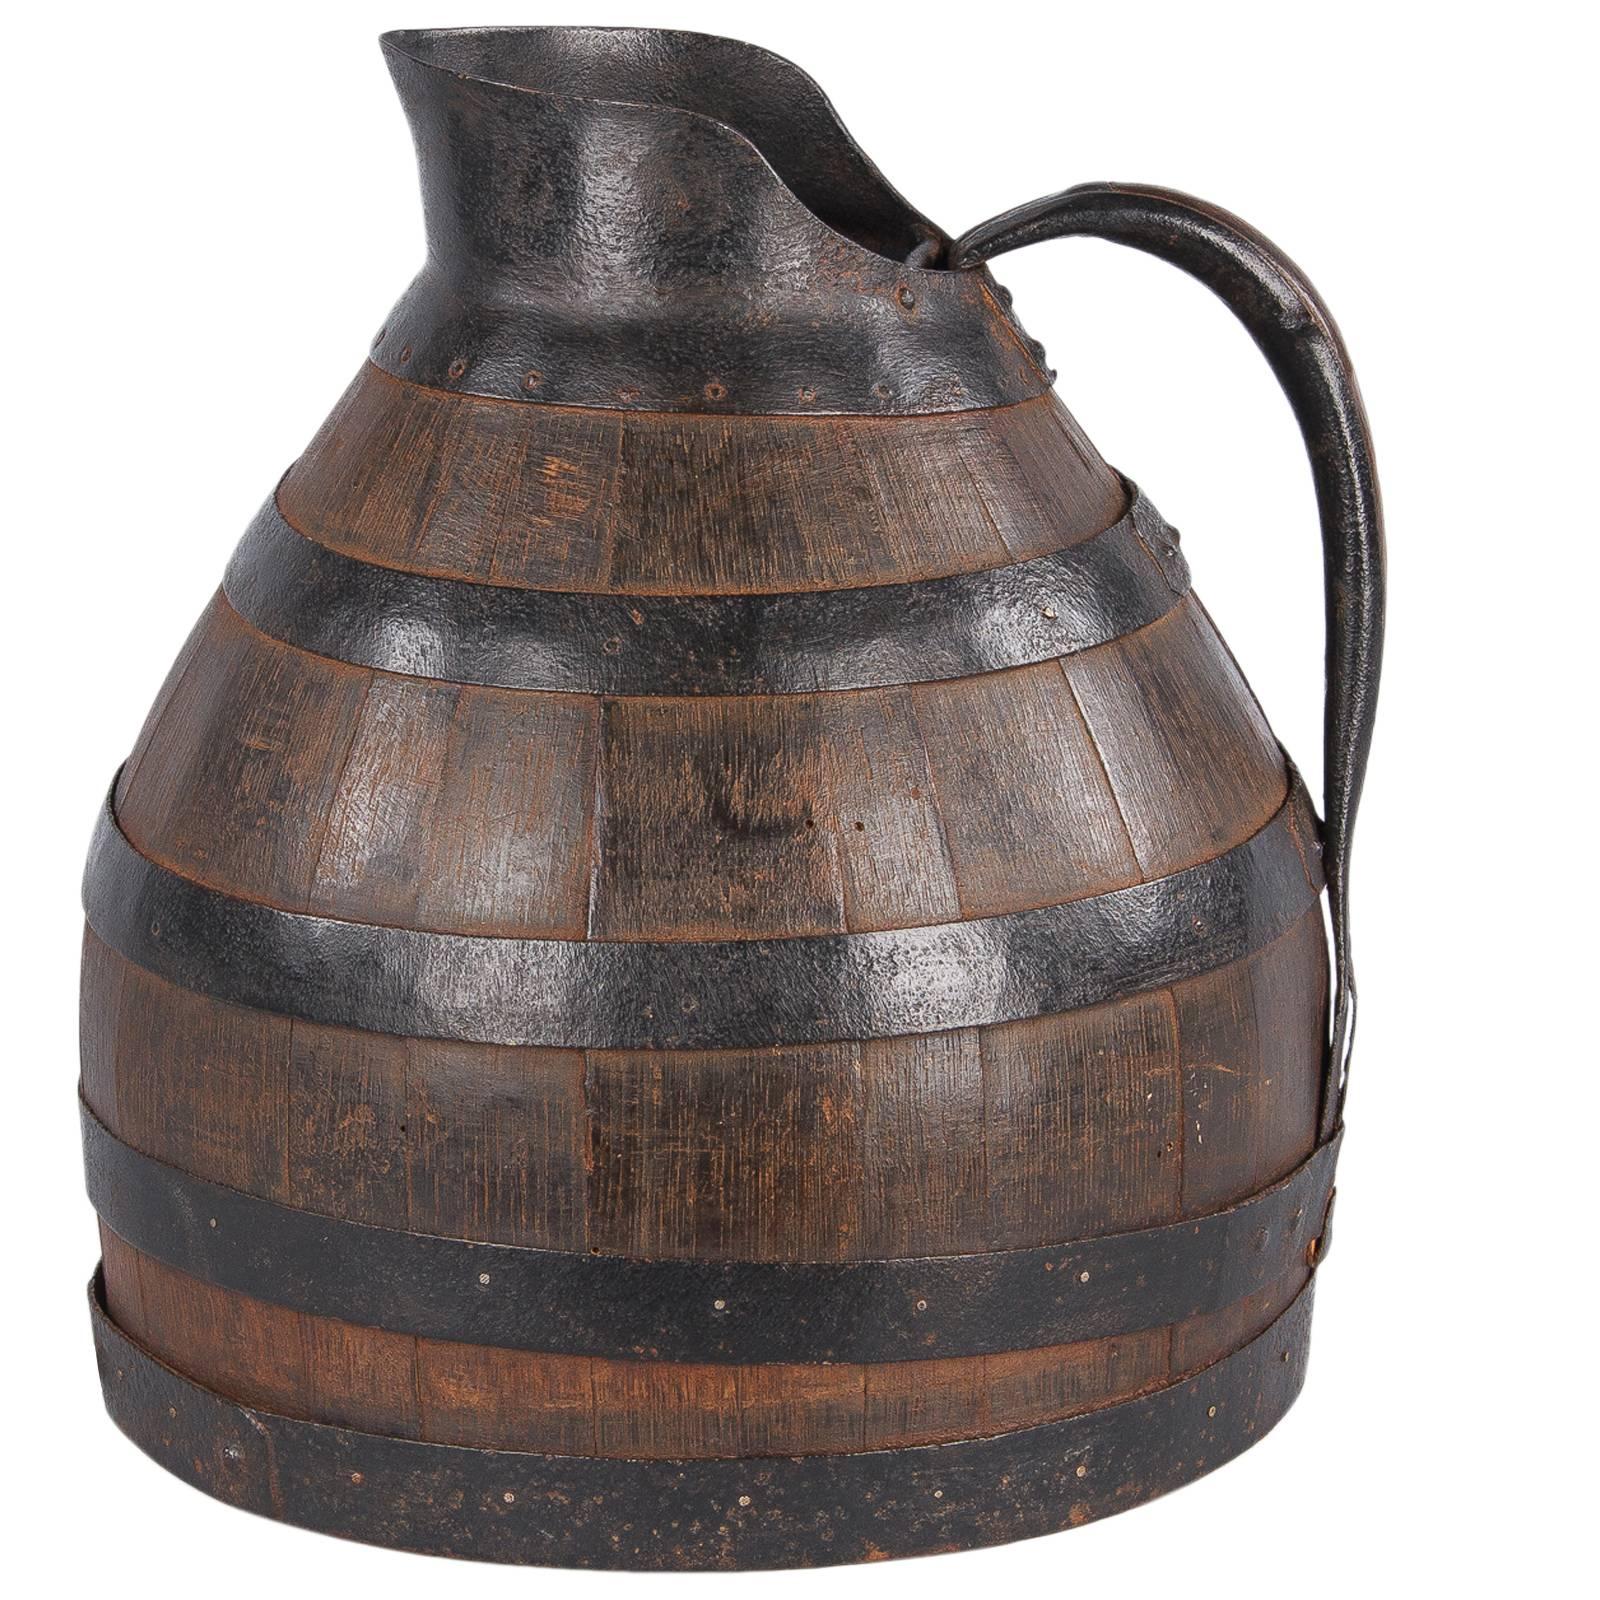 Early 1900s French Barrel-Shaped Wine Pitcher